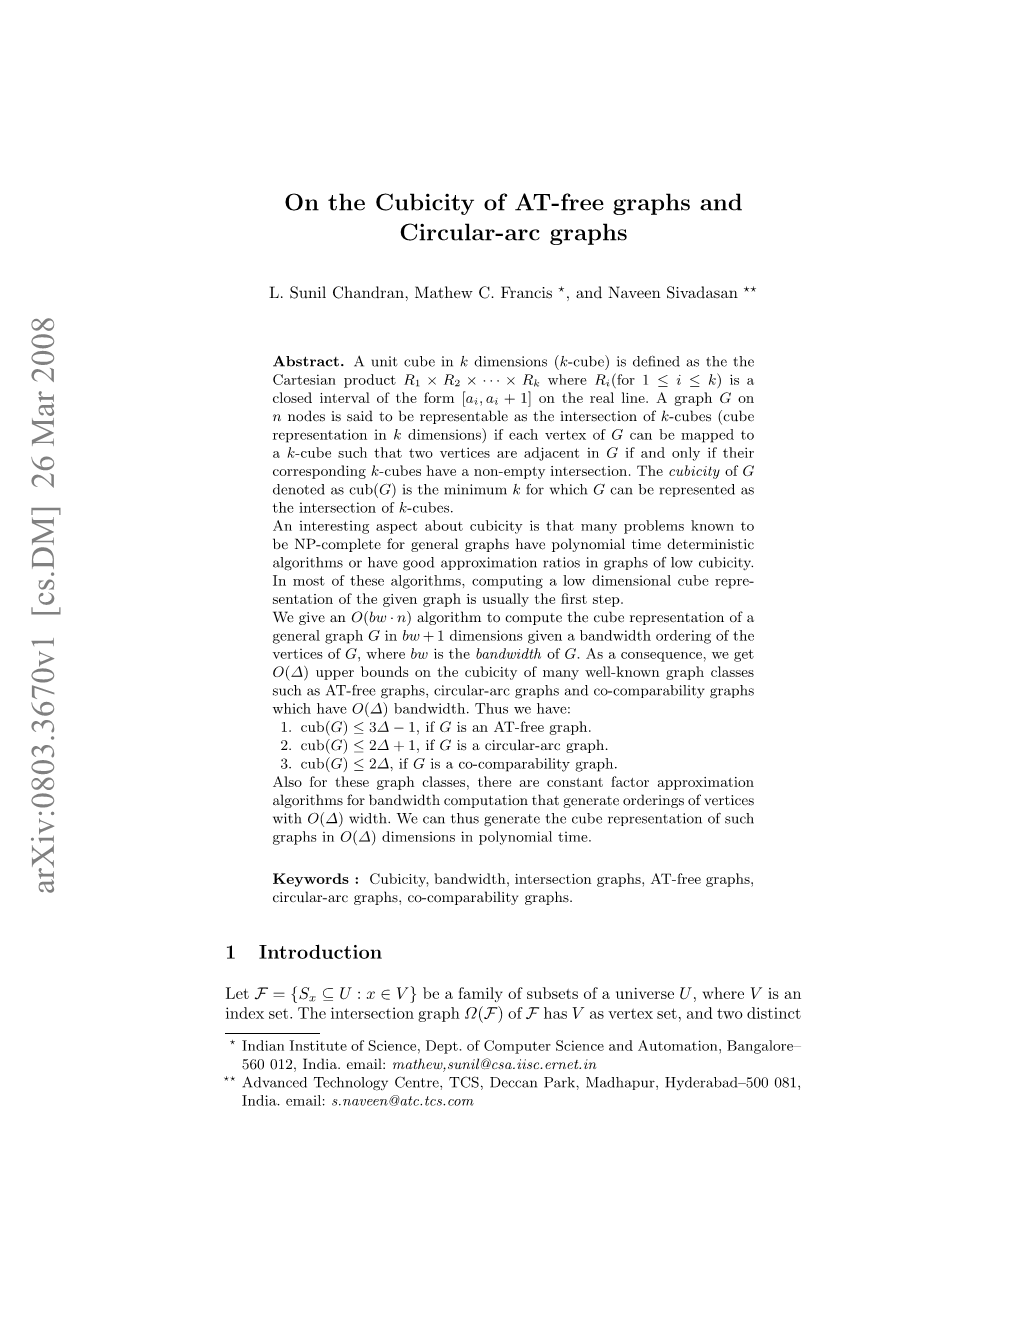 On the Cubicity of AT-Free Graphs and Circular-Arc Graphs